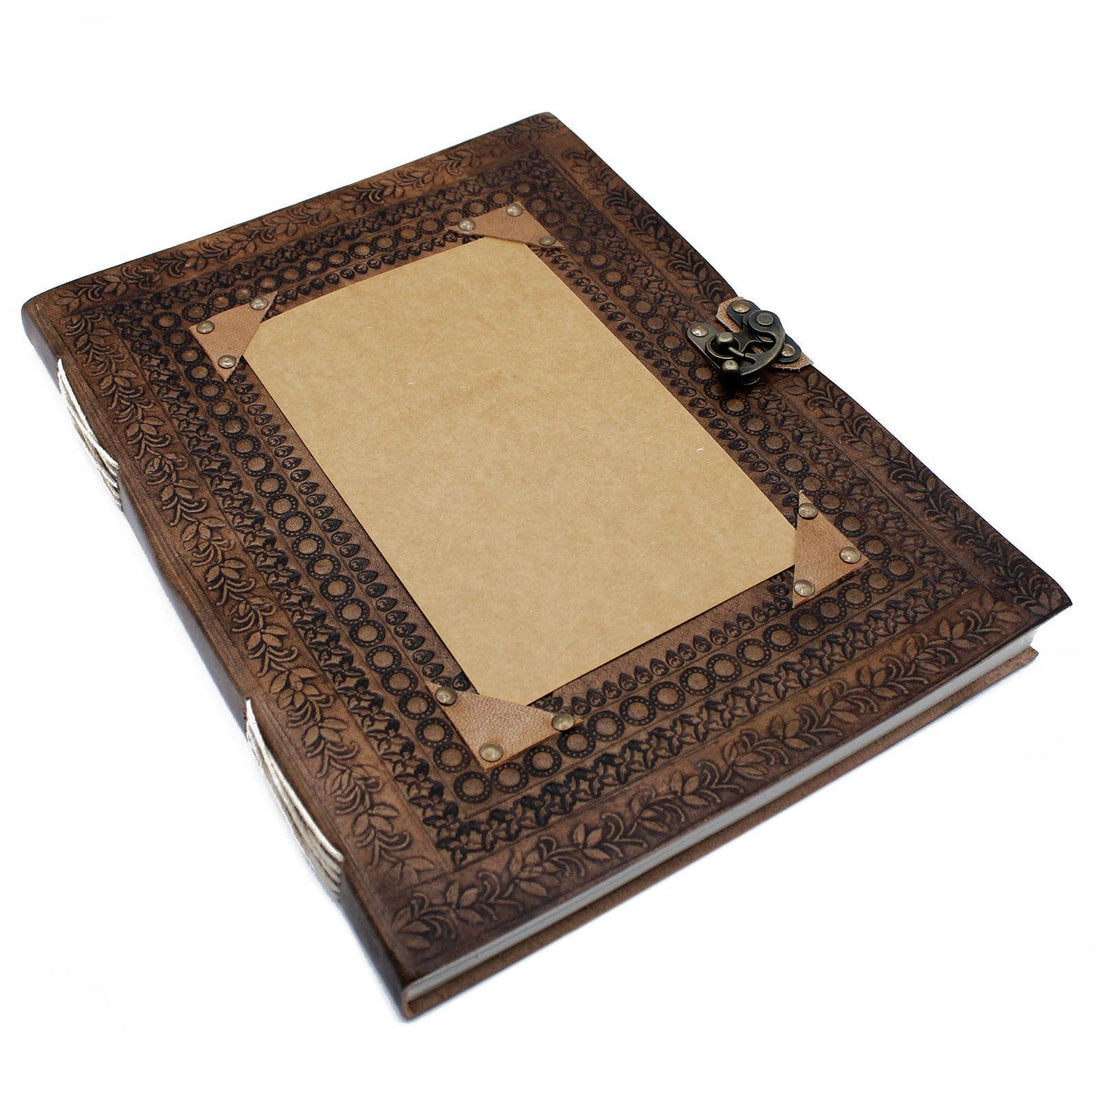 Huge Customisable Visitor Leather Book 10x13 (200 pages) - best price from Maltashopper.com LBN-21